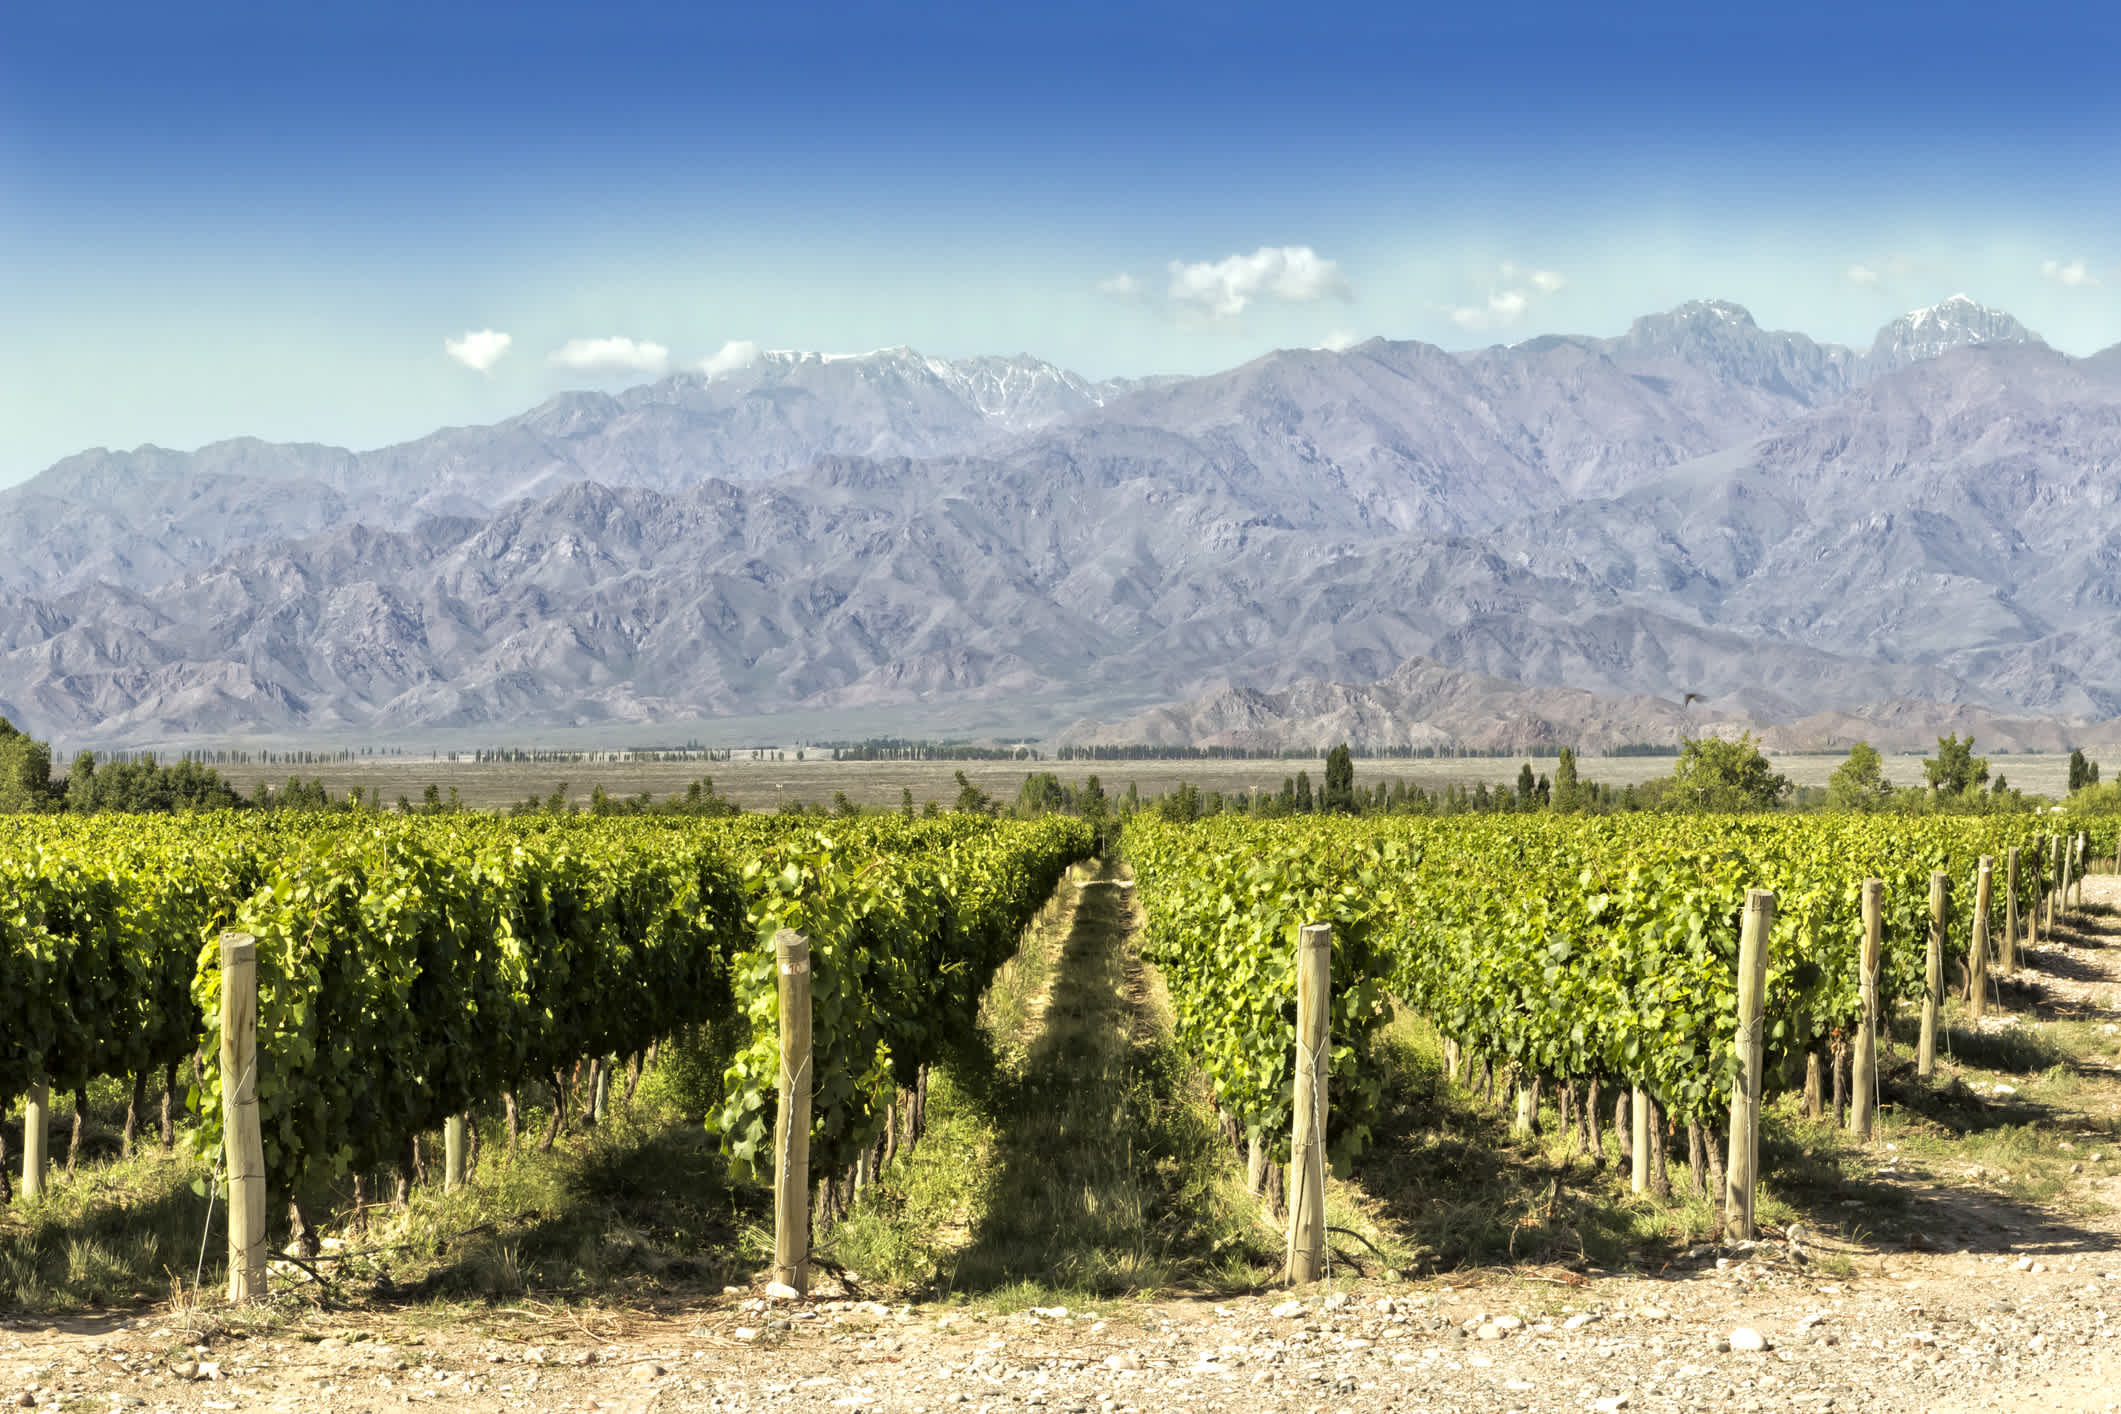 Argentina Wine Region Guides: Discover the Best Wine Regions